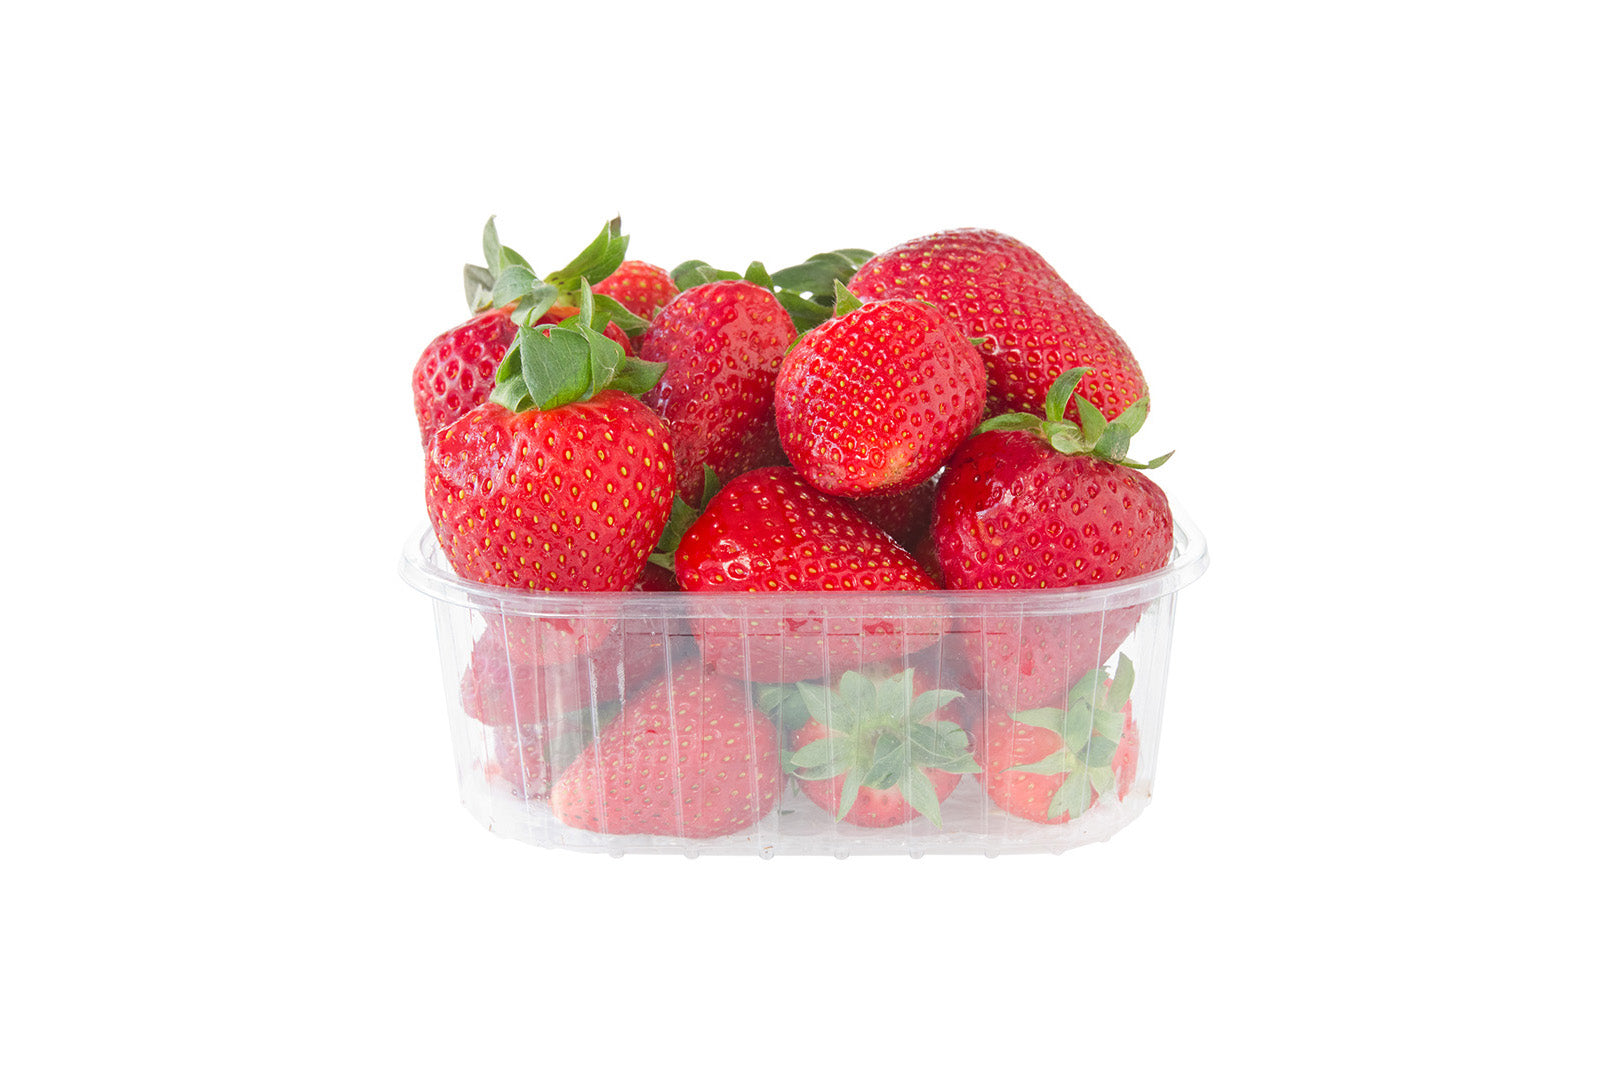 Where to buy Fresh Veggies SG Fresh Fruits and Vegetables Online Delivery in Singapore Near You Strawberries (USA/Australia) 草莓